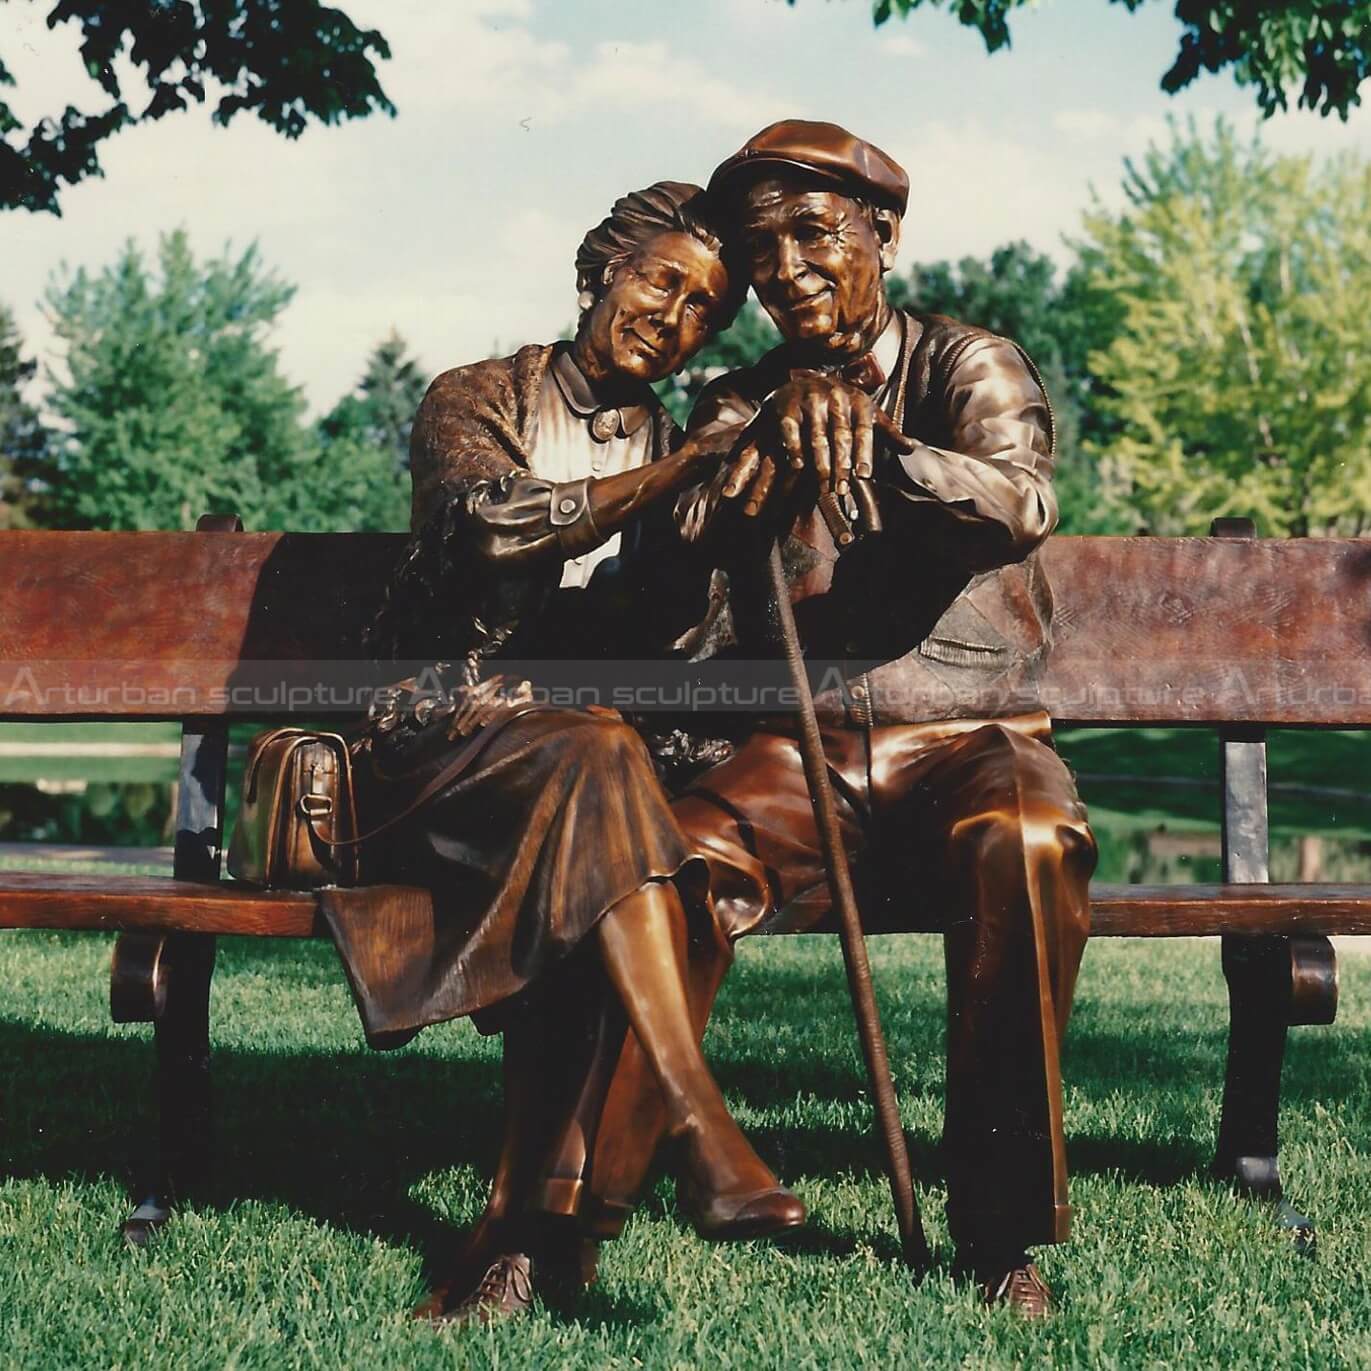 Couple Garden Sculpture, Old Couple Sitting on Bench